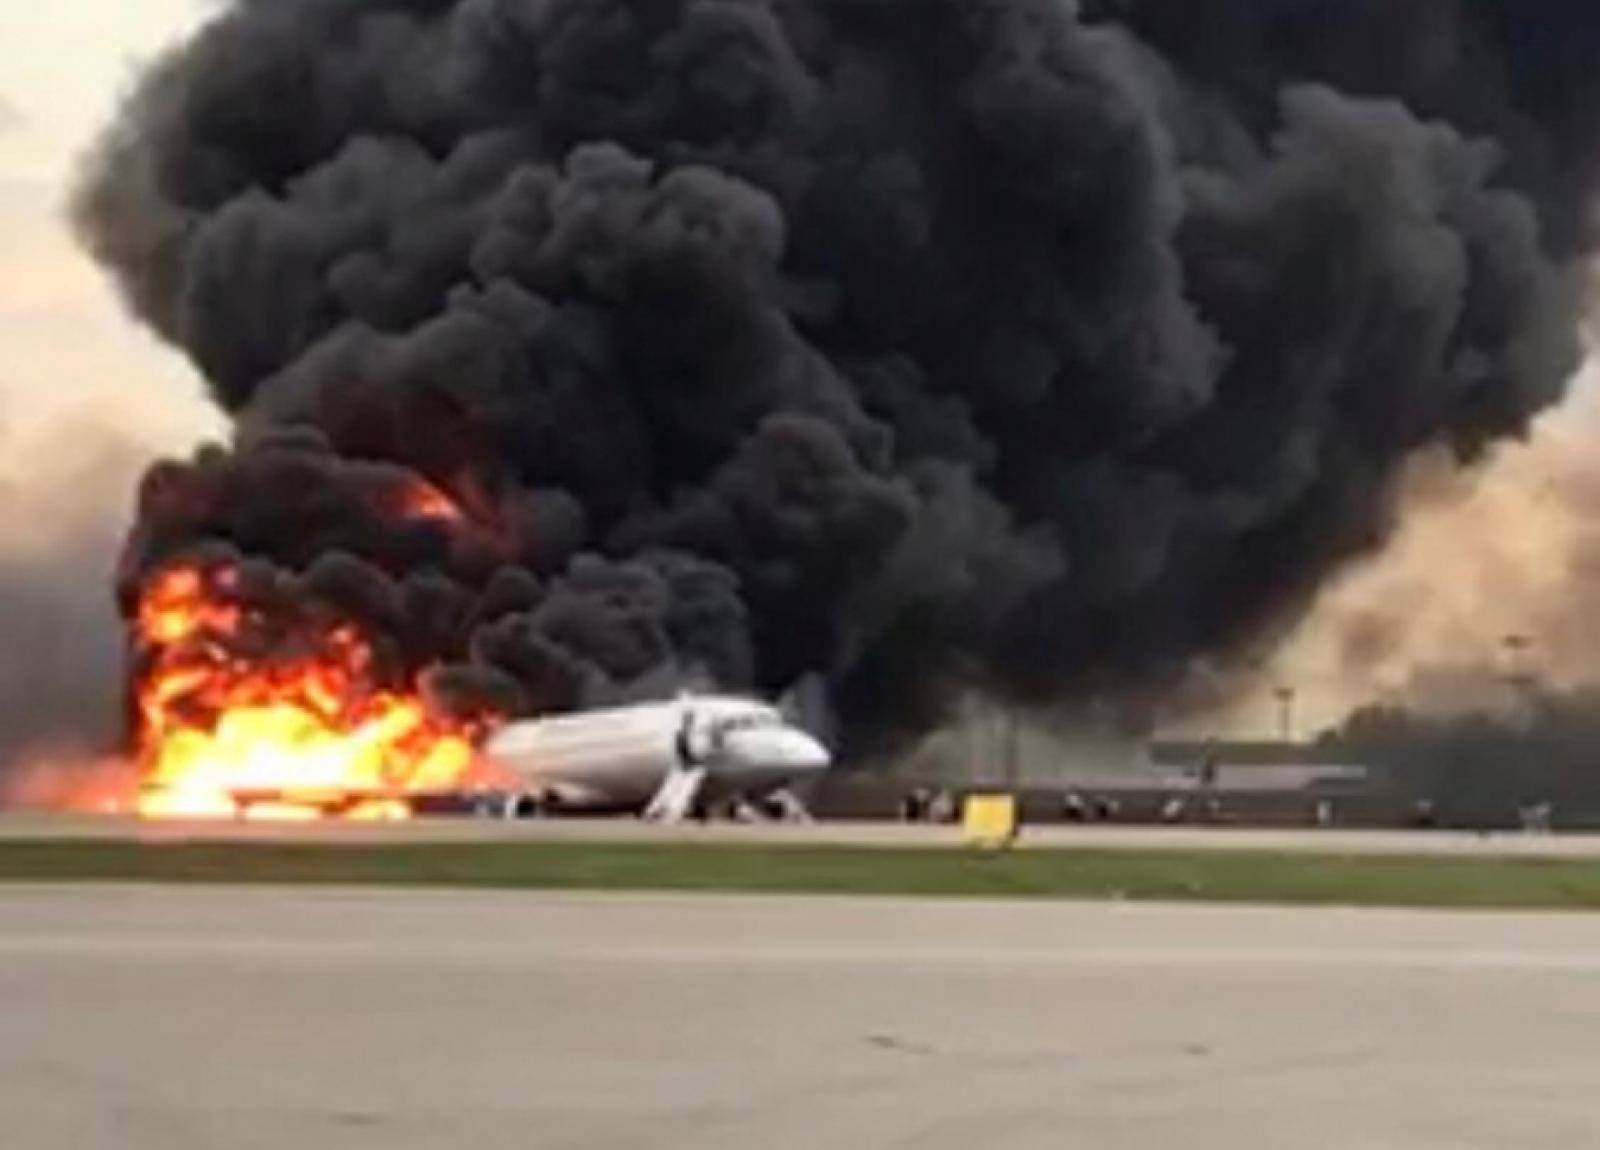 A passenger plane is seen on fire after an emergency landing at the Sheremetyevo Airport outside Moscow